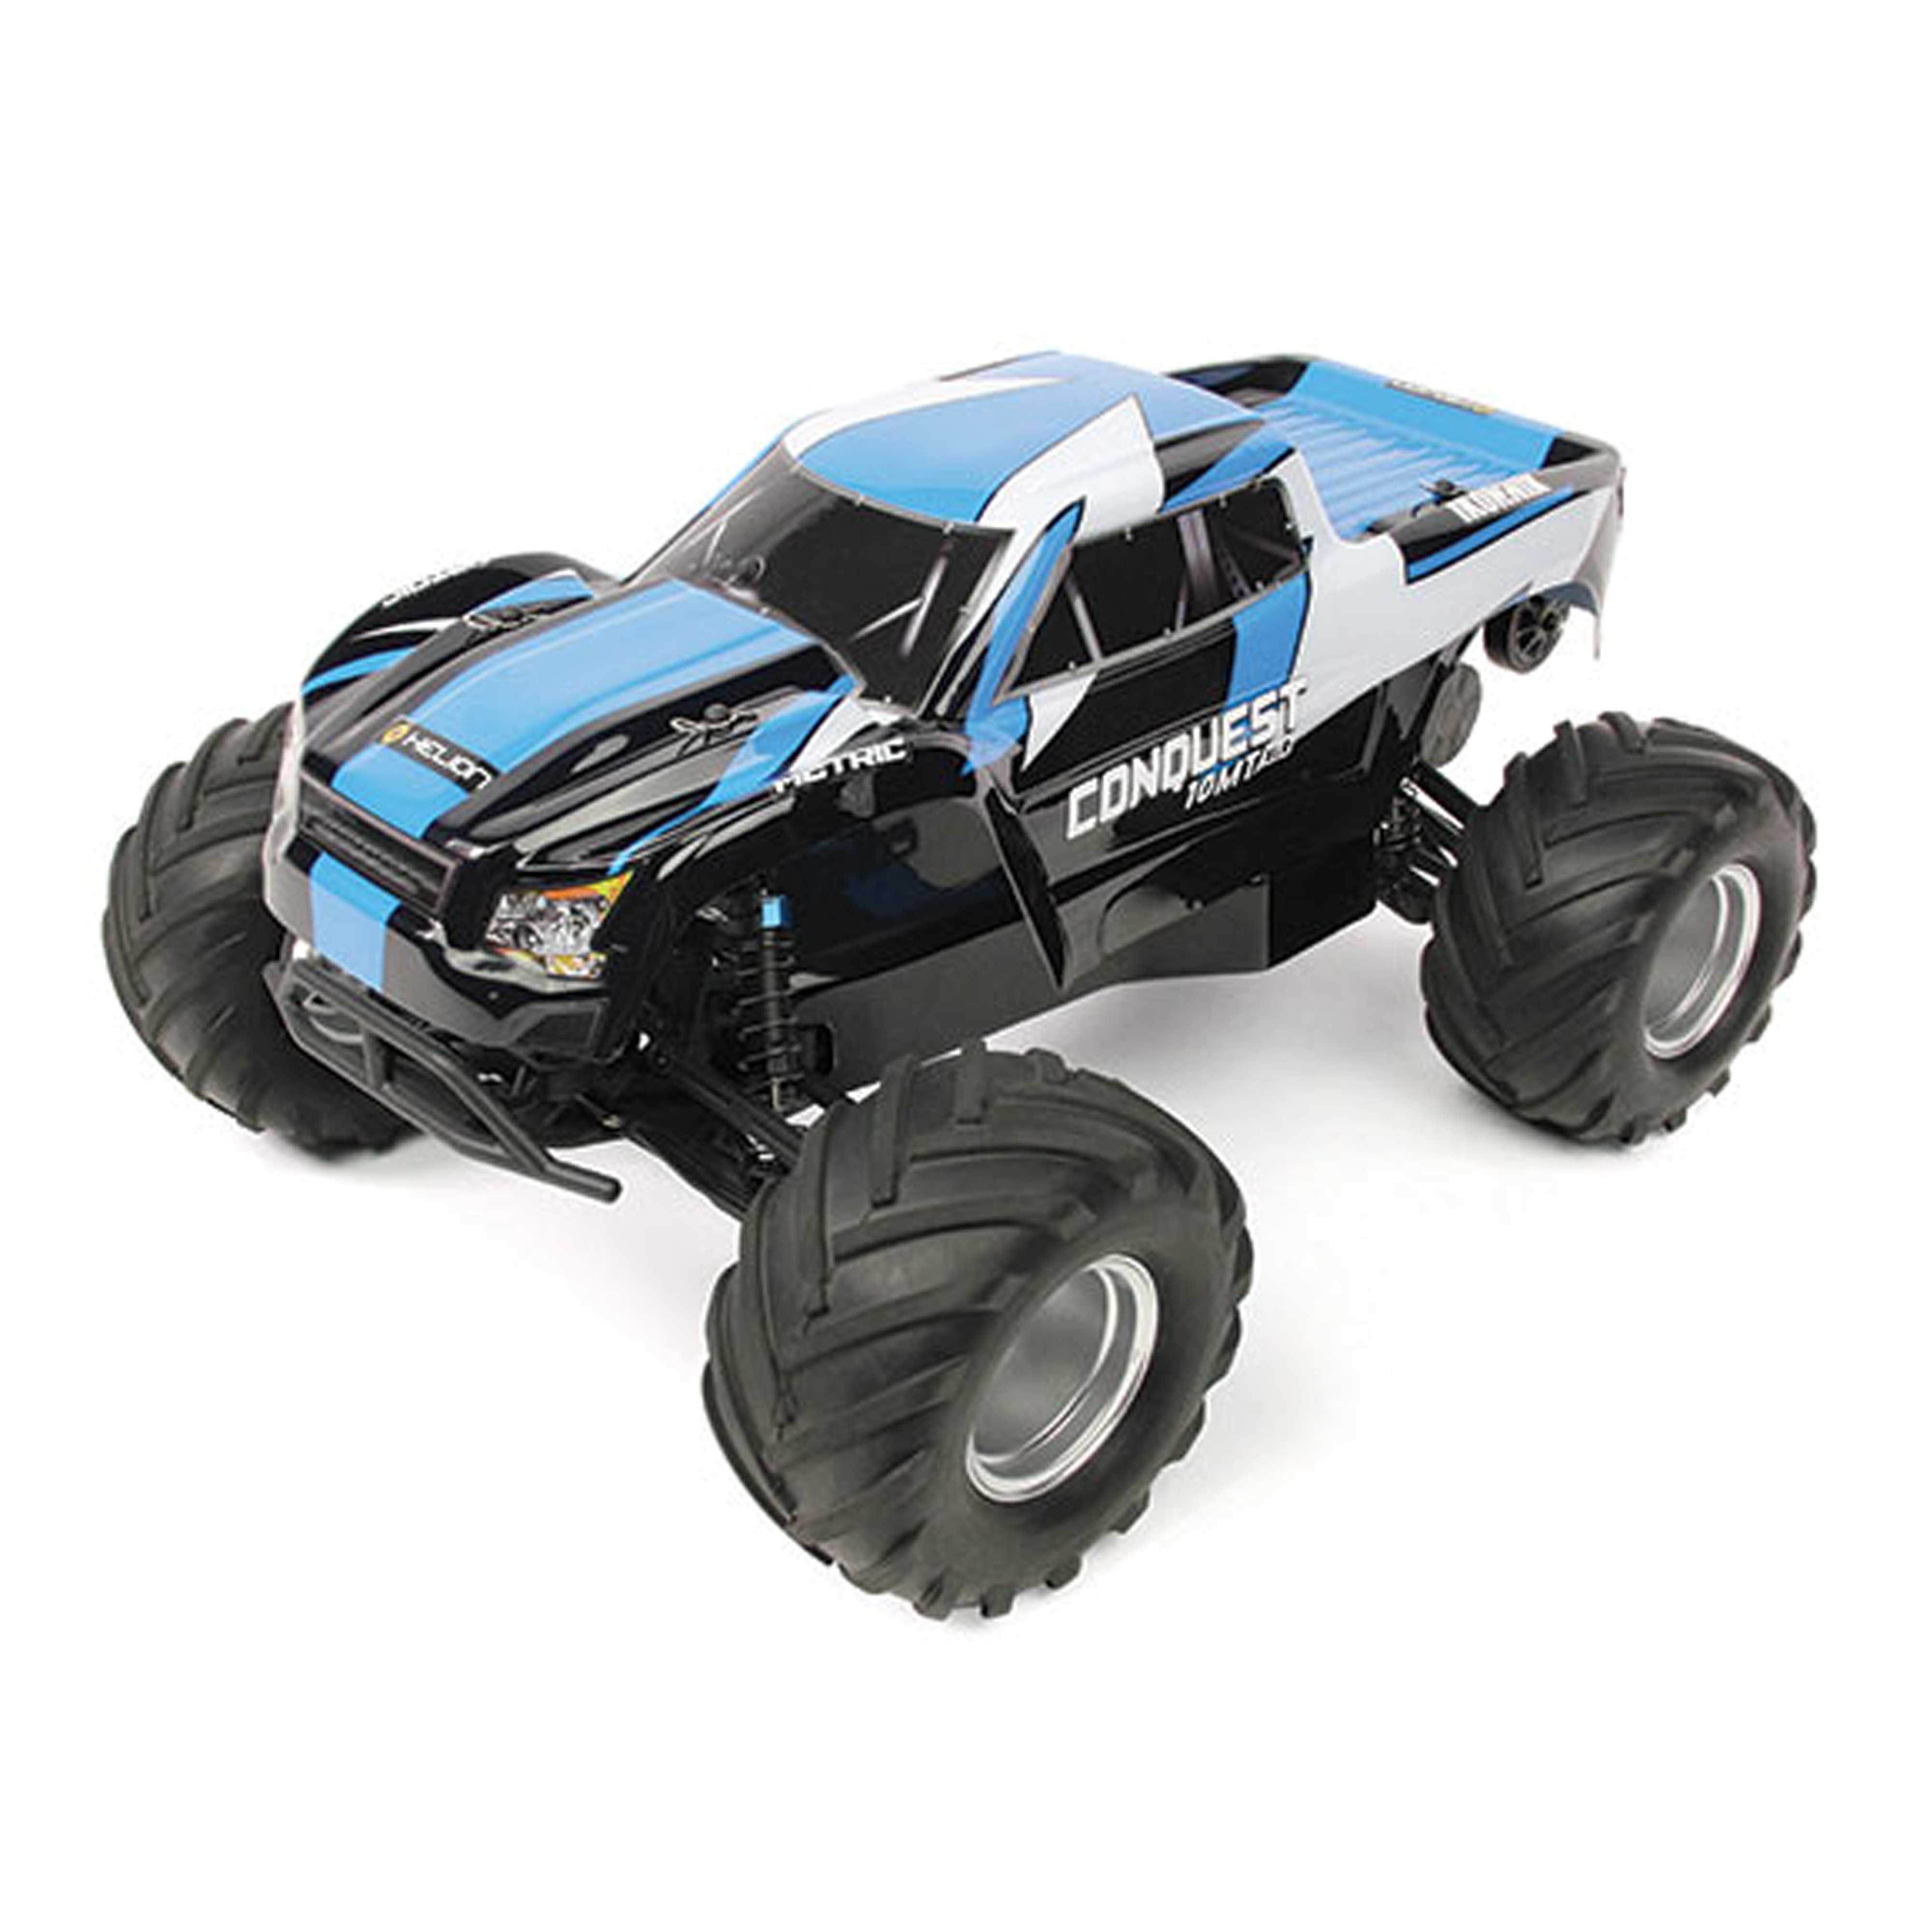 Image of Helion Conquest 10MT XLR 1:10 Scale 2WD RC Truck